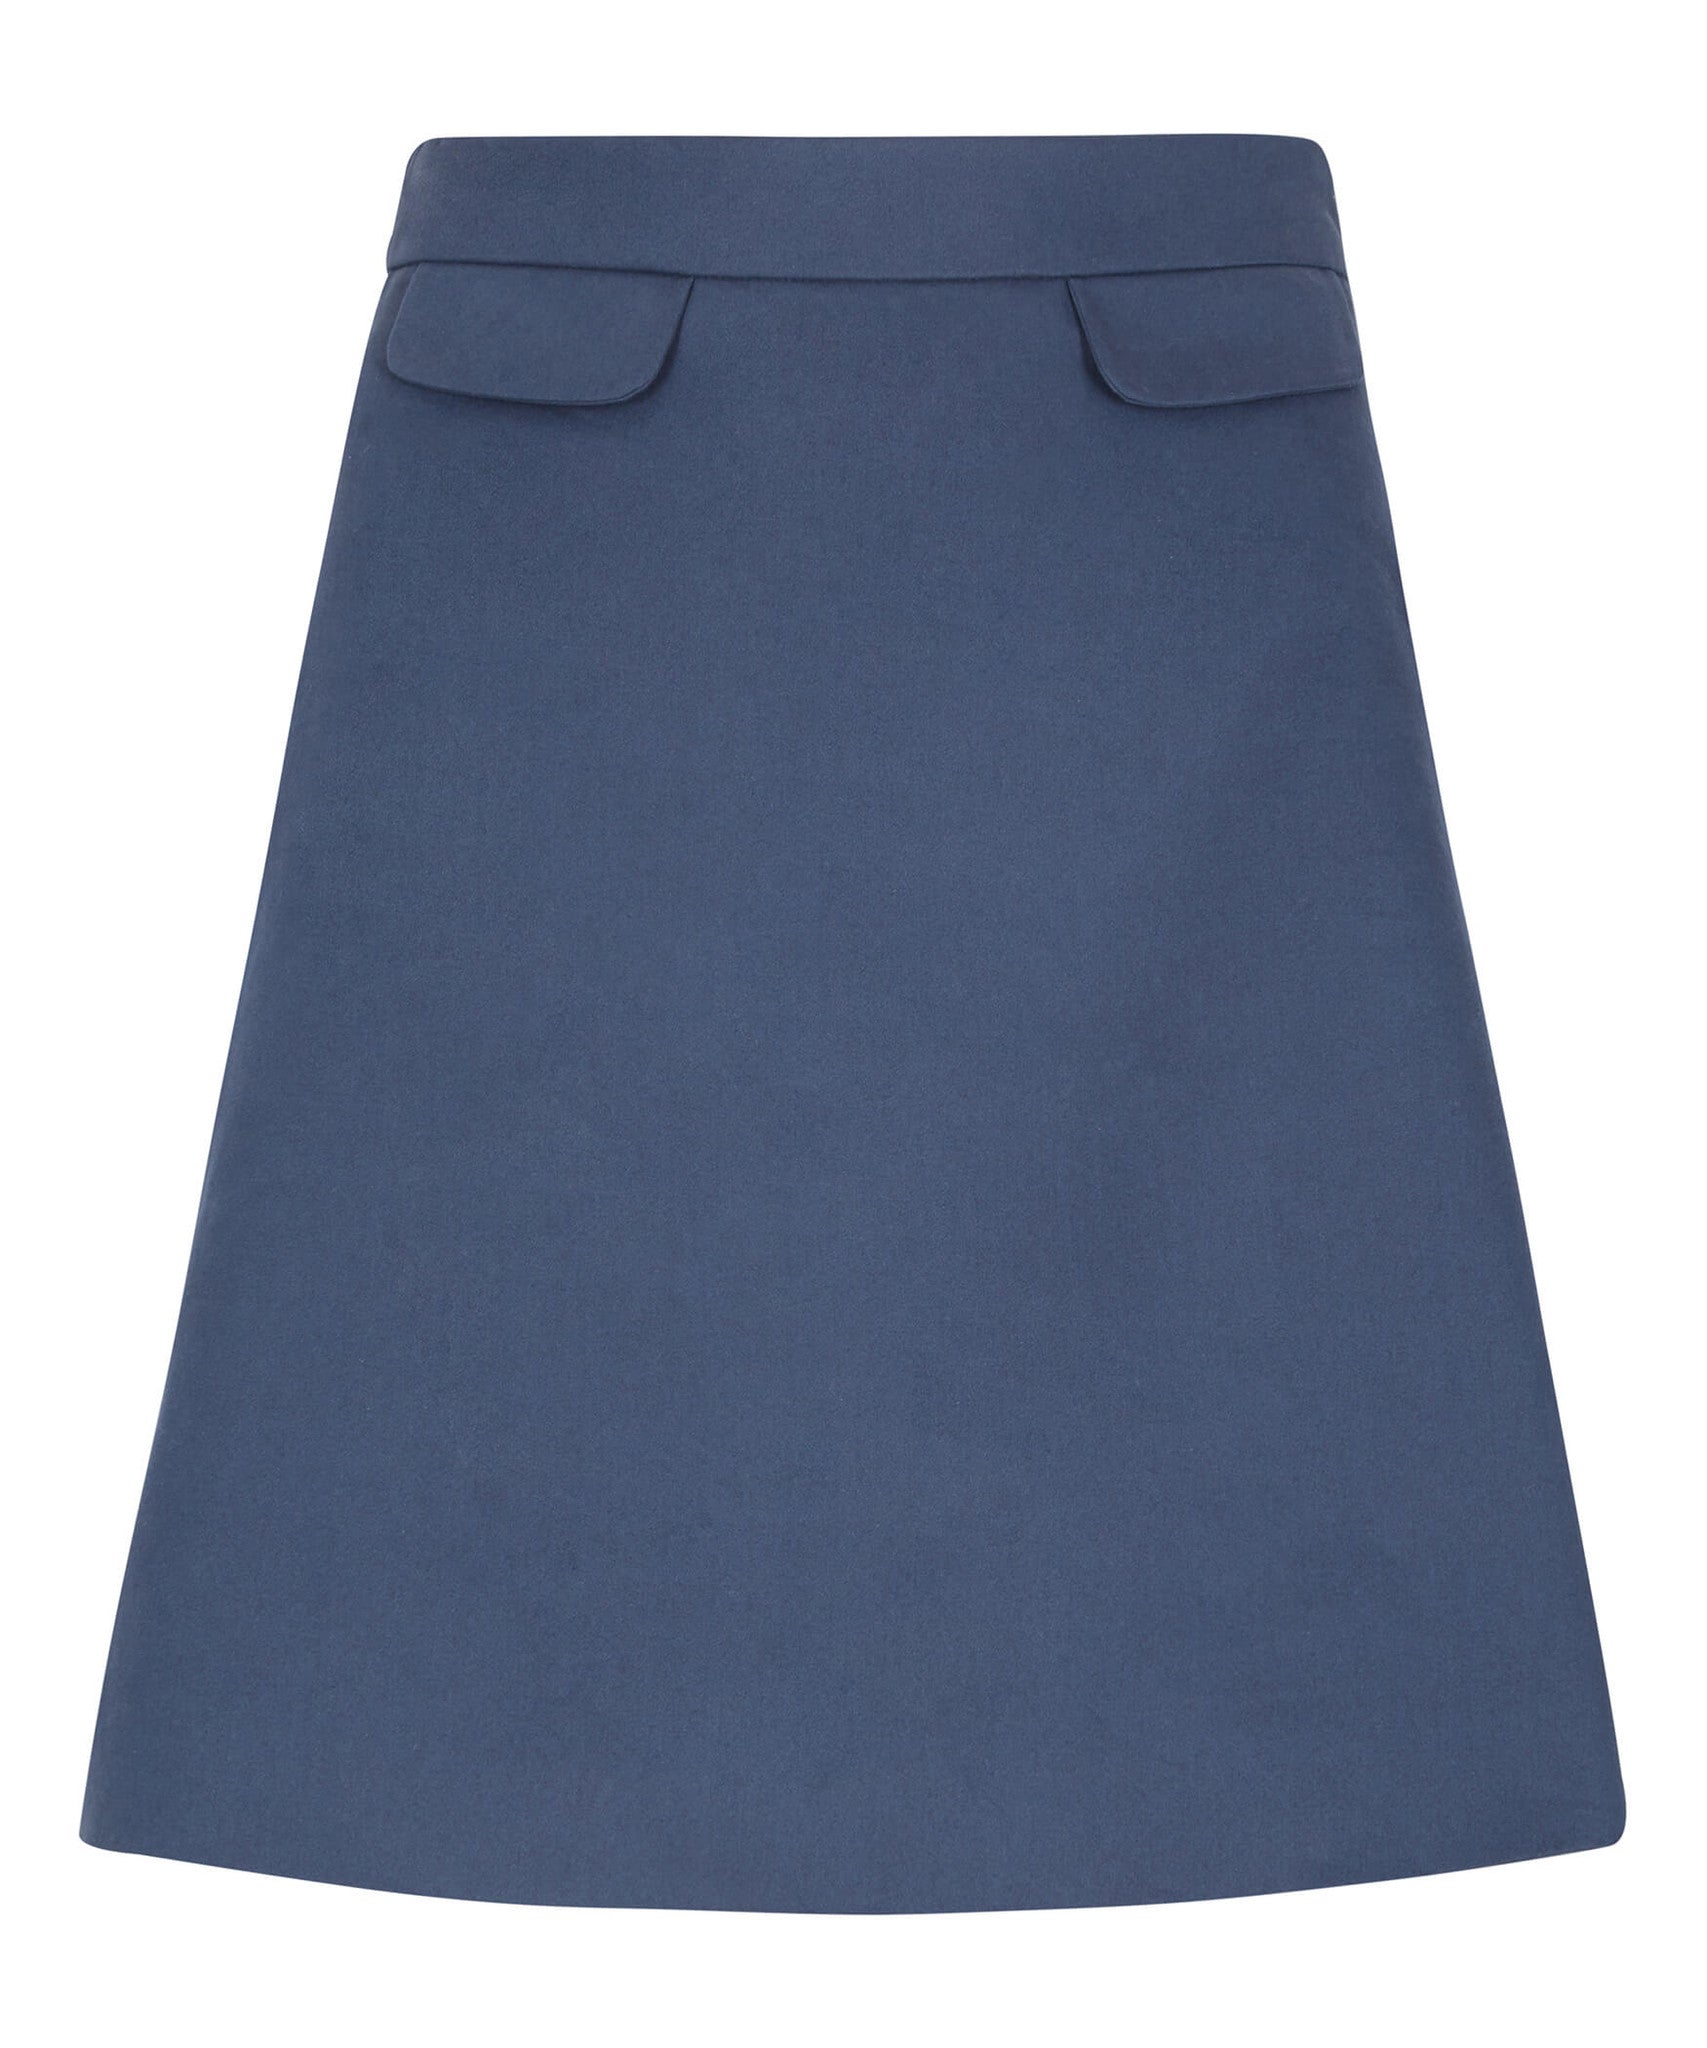 Petite Navy Blue Skirt (Cotton Sateen) Made In The UK